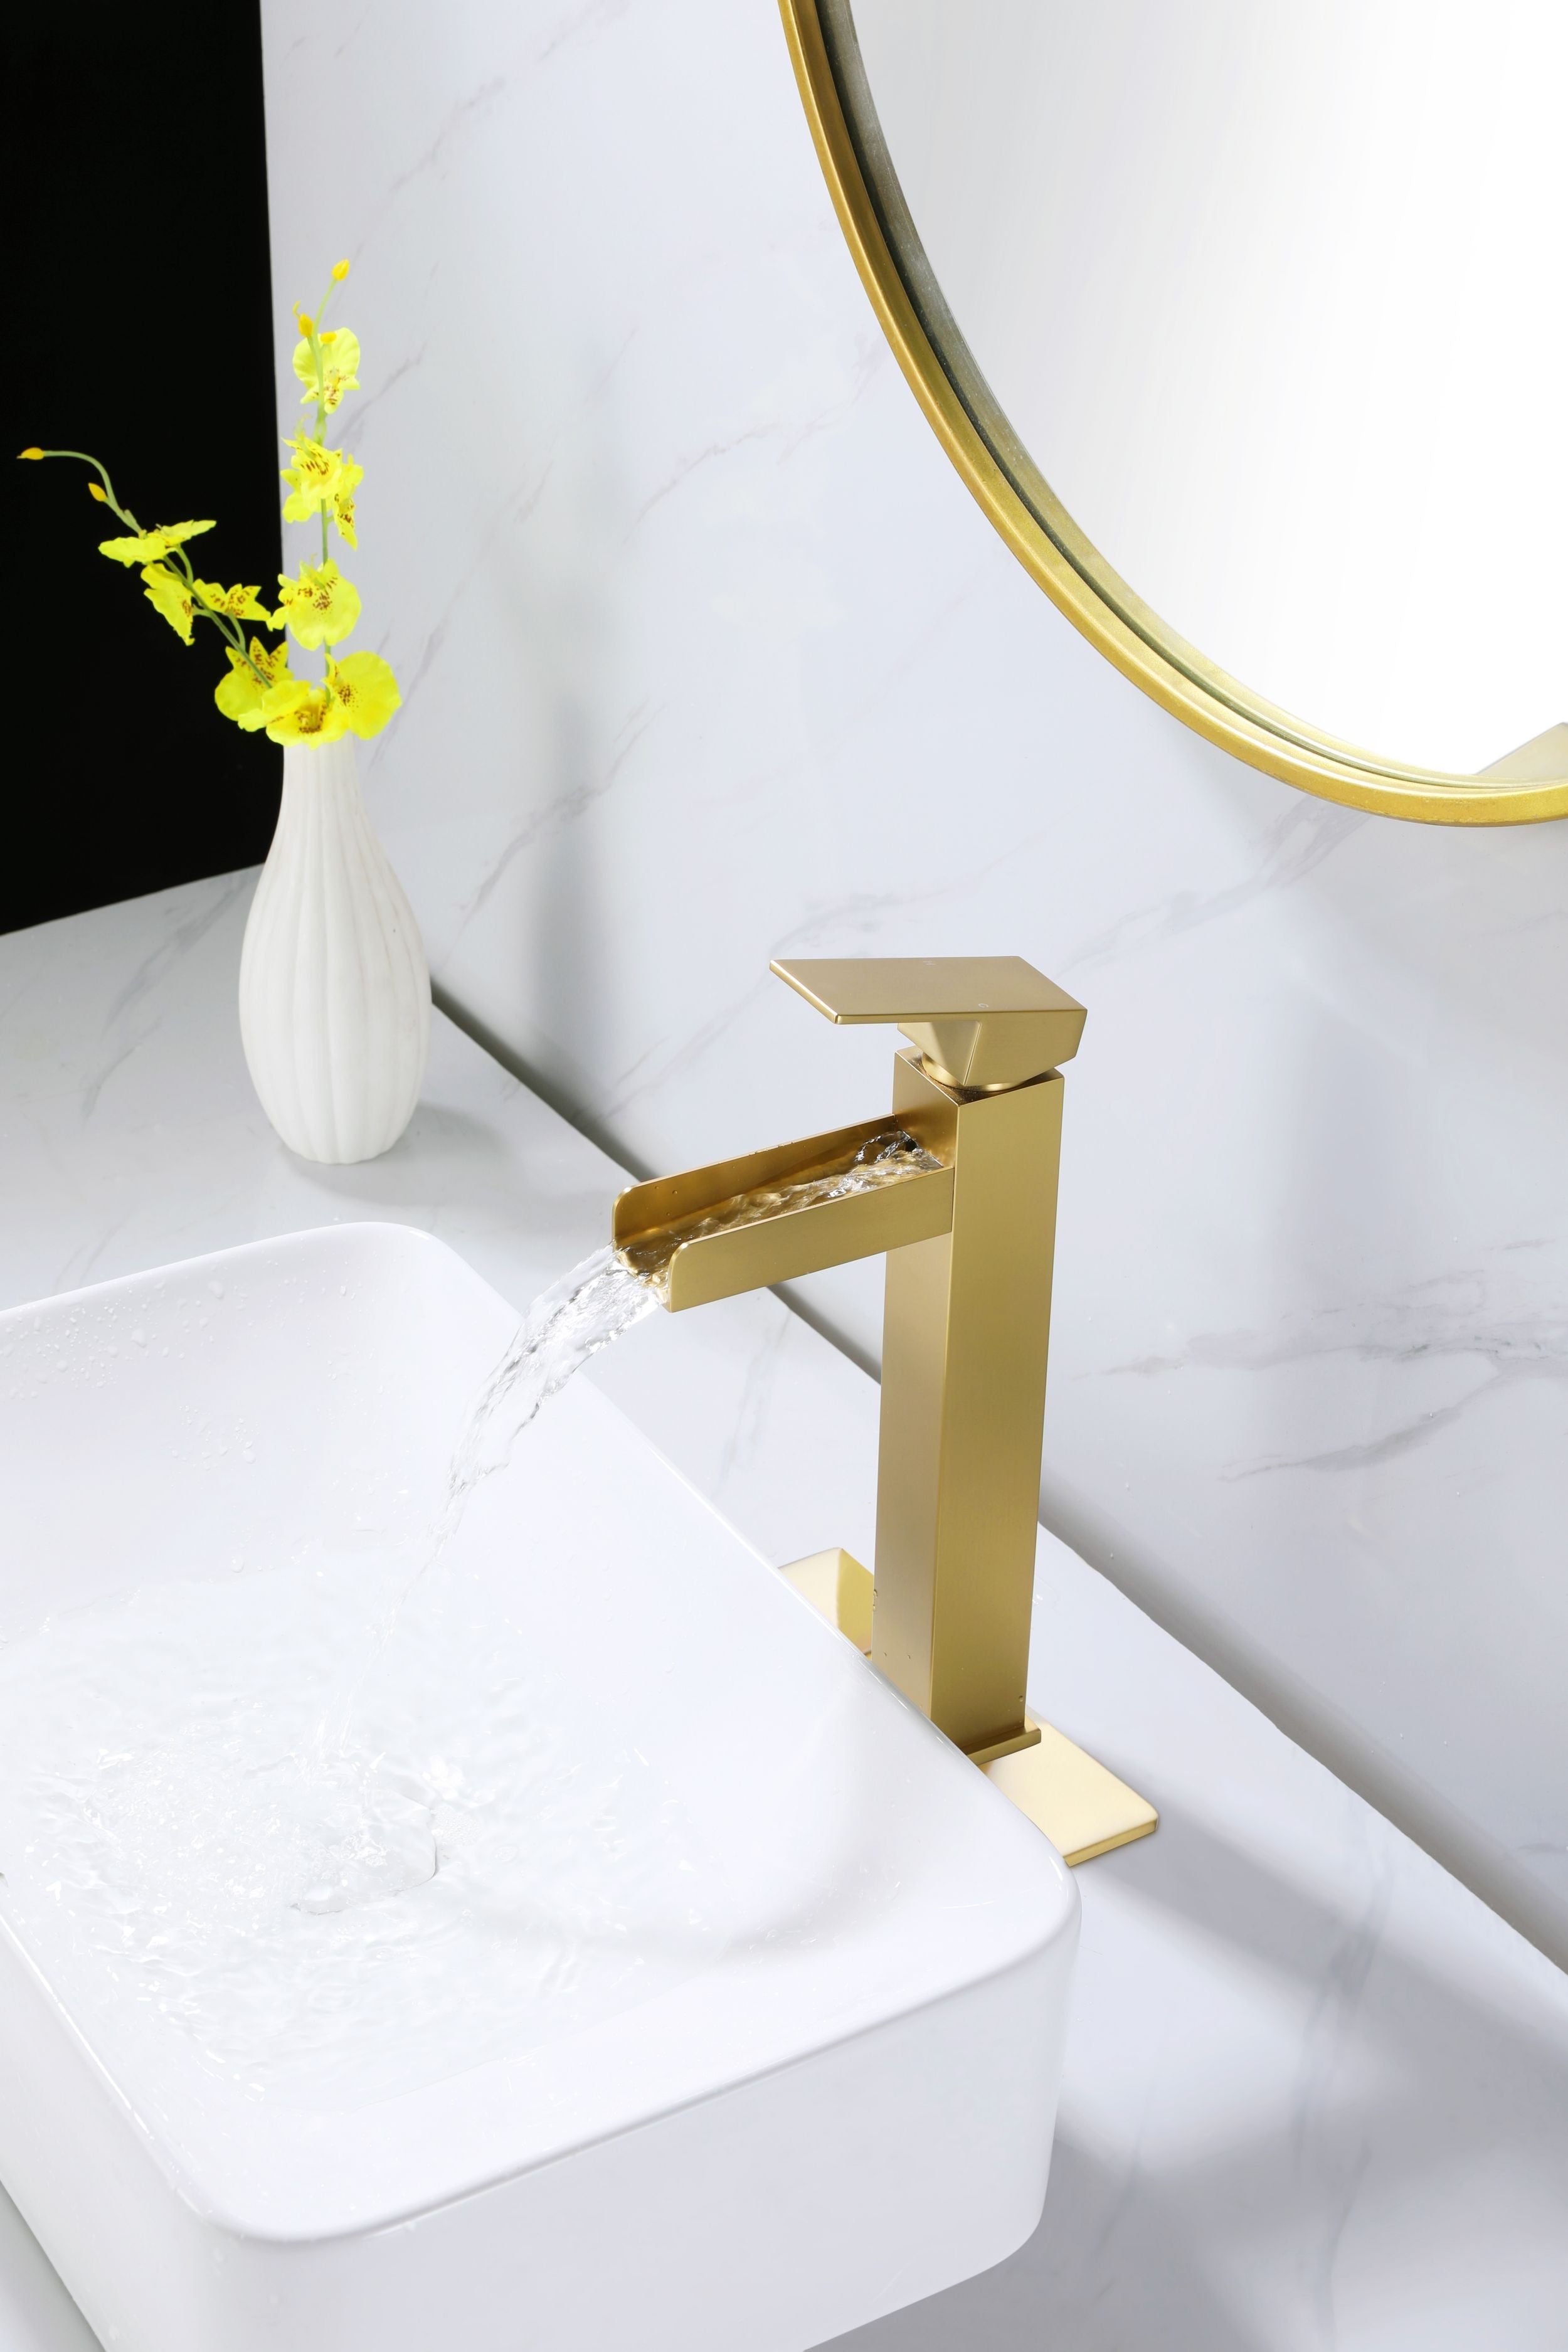 Tall Waterfall Spout Bathroom Lavatory Faucet Deck Mounted Brushed Gold